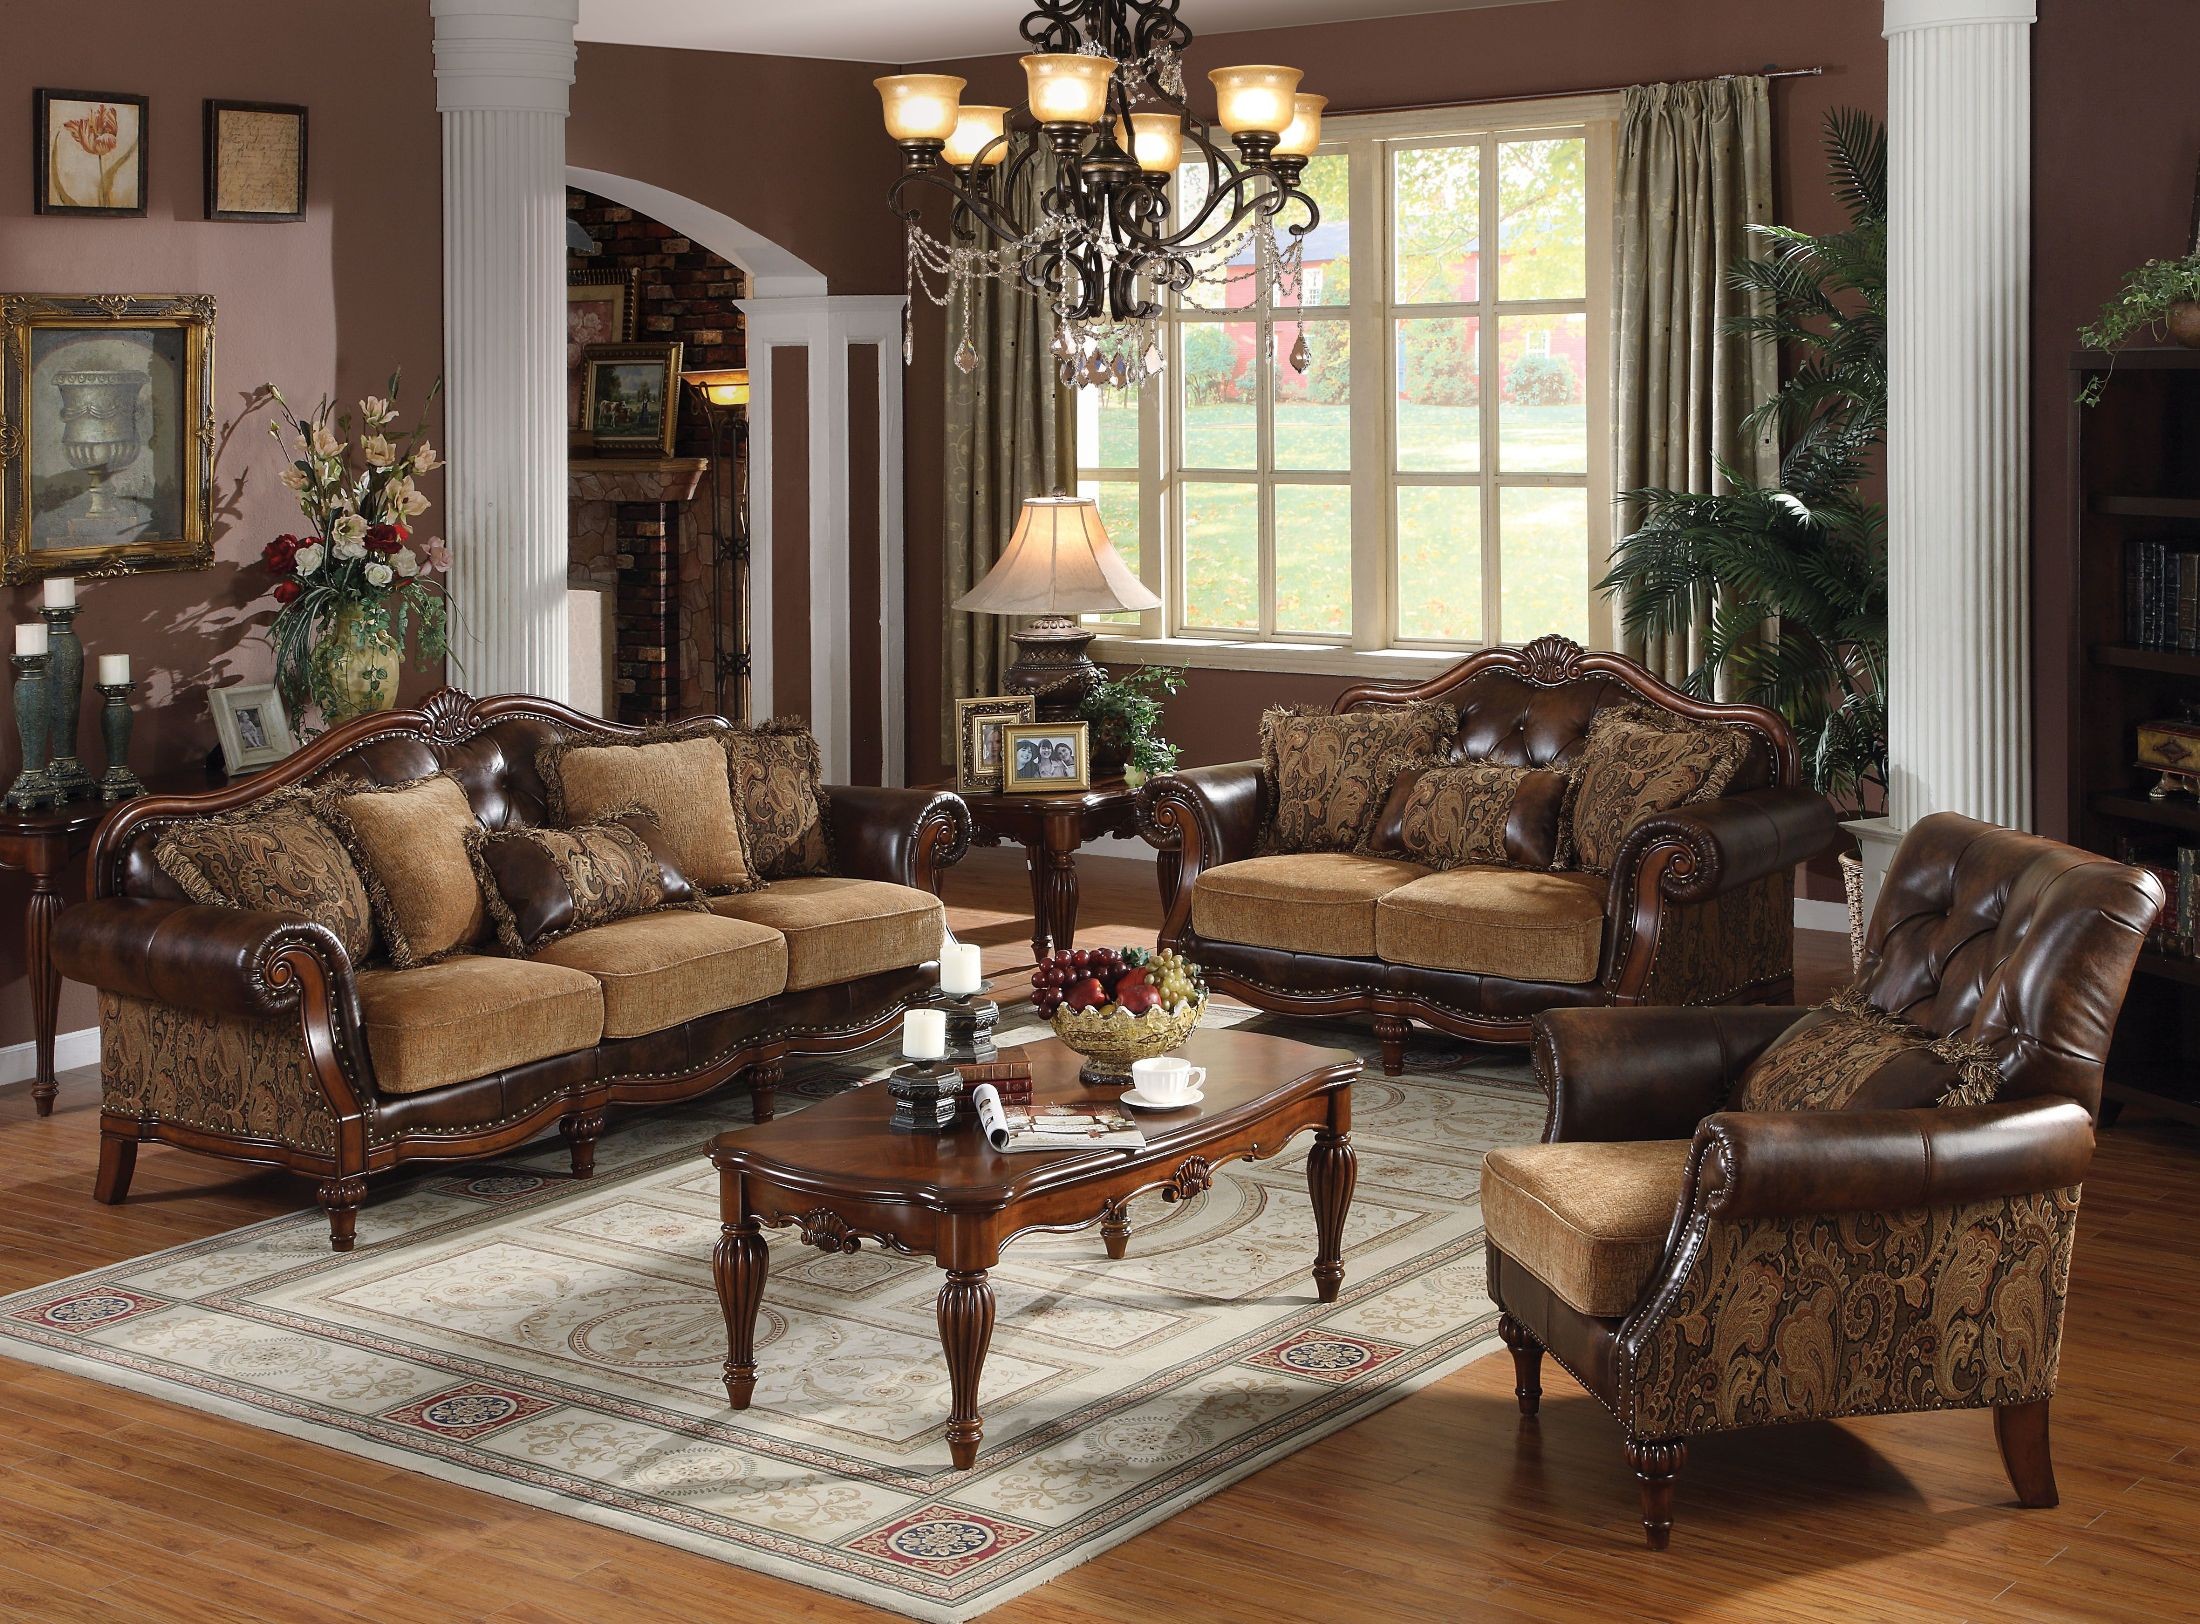 Two Tone Brown Living Room Runiture